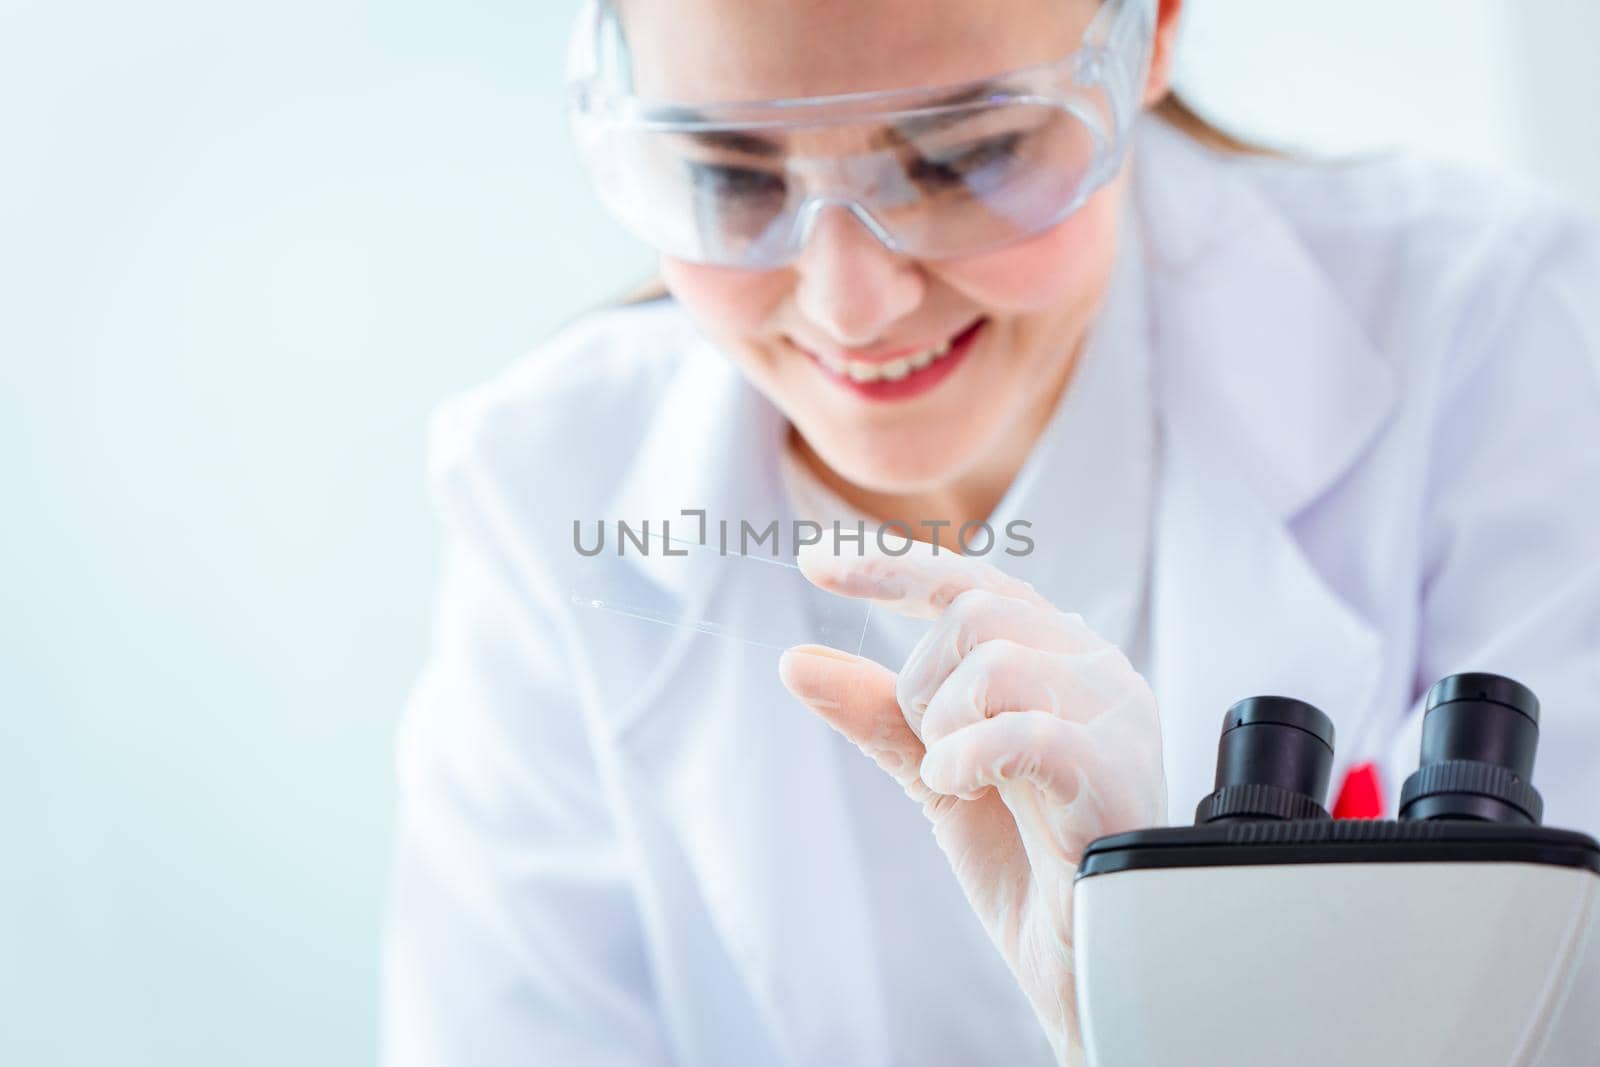 Scientist smiled while holding the test results for the virus vaccine in a science medical research lab.